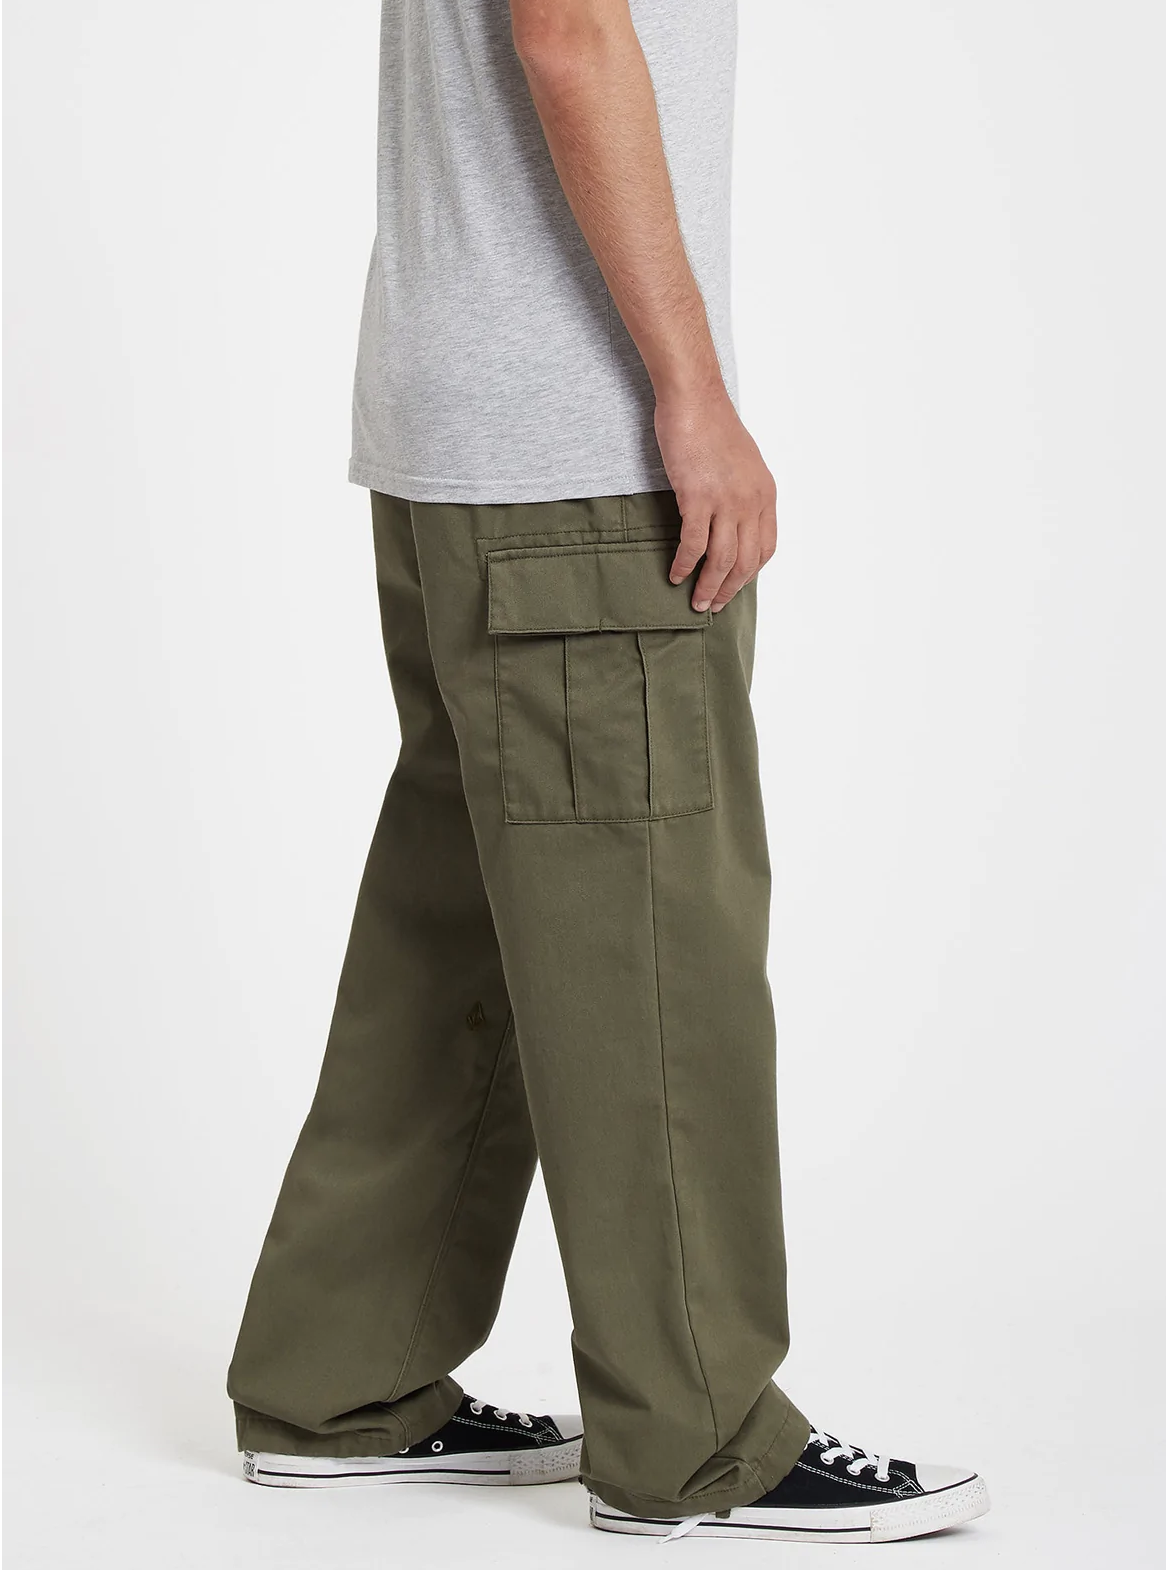 MARCH CARGO PANT MILITARY VOLCOM